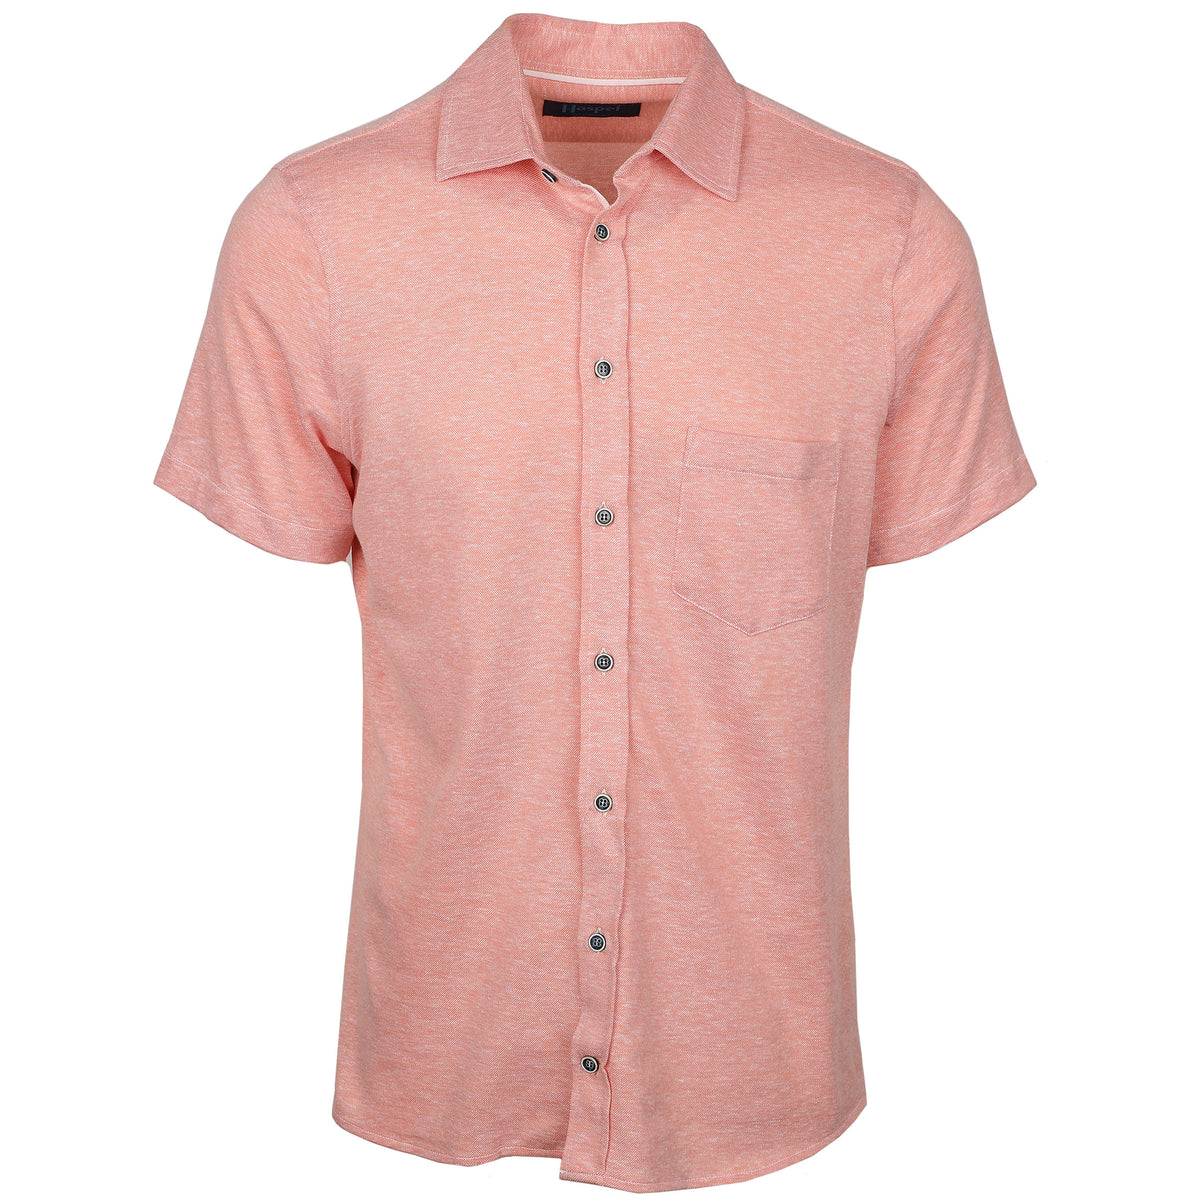 Introducing the Capri Tangerine Full Placket Short Sleeve Knit Shirt - designed for lasting comfort and style. Its lightweight fabric provides breathability, while buttons down the front offers a modern, tailored look. Versatile enough for the office or weekend, this shirt is sure to be a warm weather wardrobe staple.  100% Cotton • Full Plackett • Left Chest Pocket • Imported